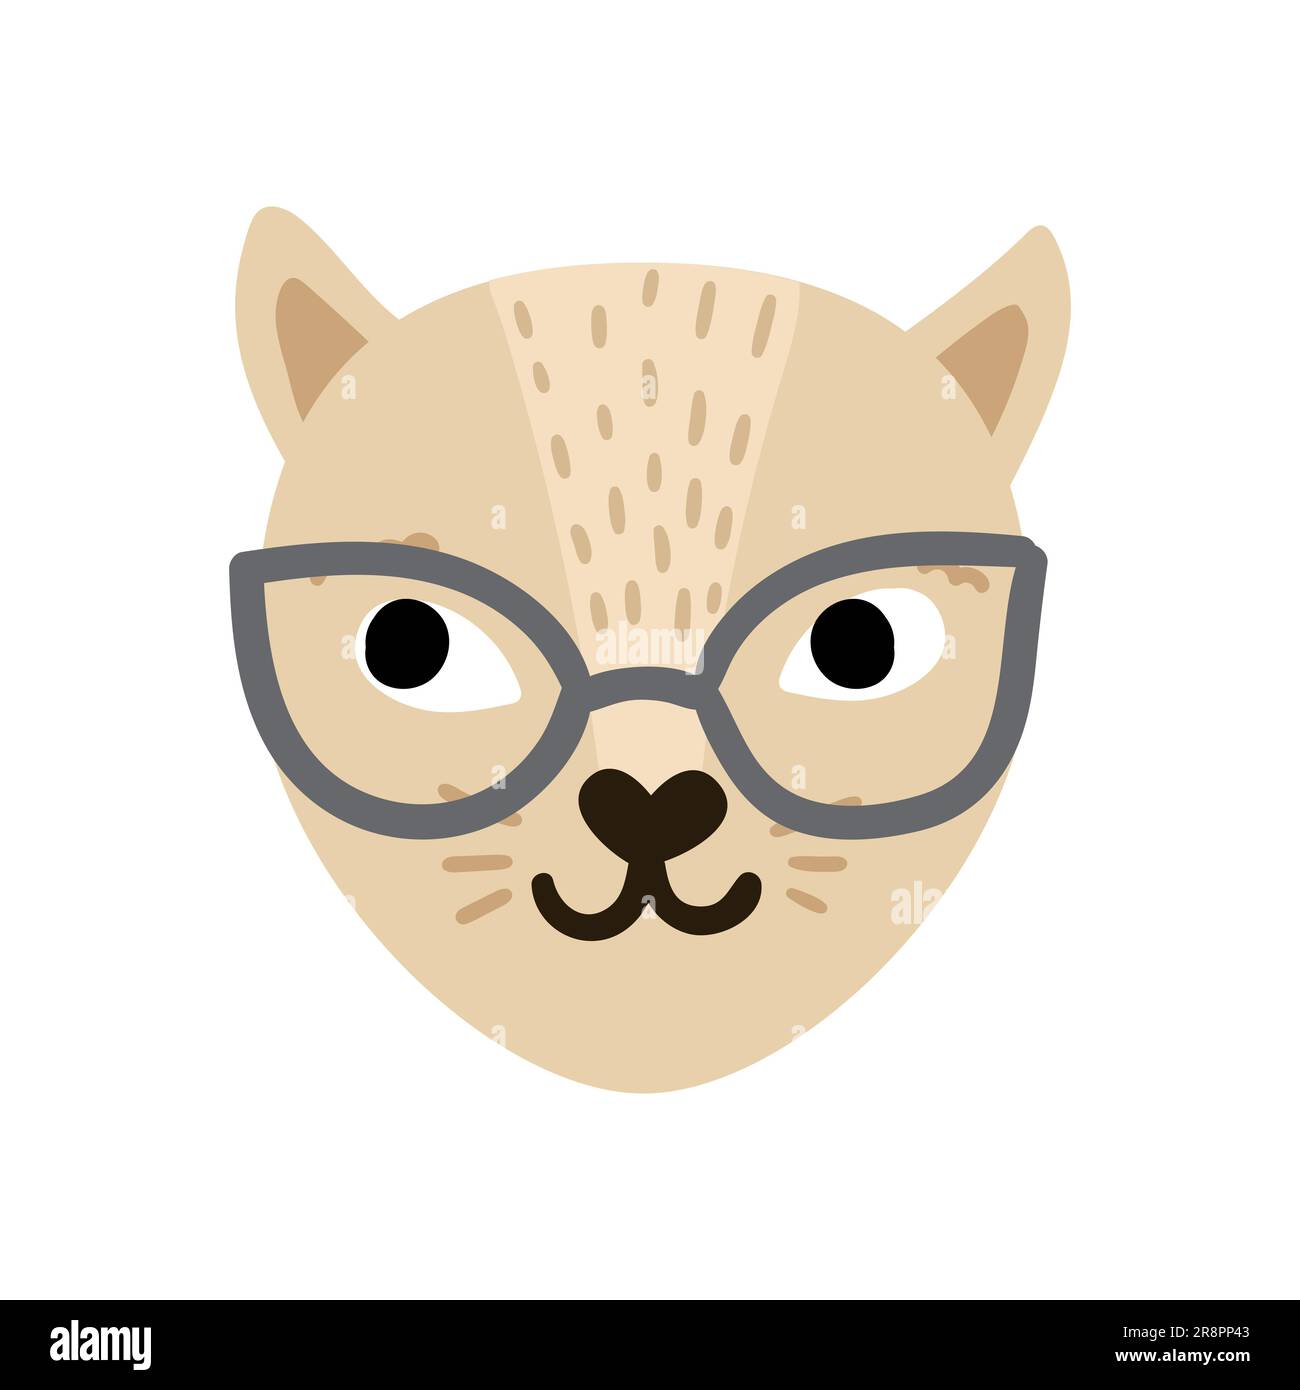 Cute hand drawn cat. Colored animal s face with nice elements, whiskers, eyes in sunglasses. Vectir illustration isolated on white Stock Vector